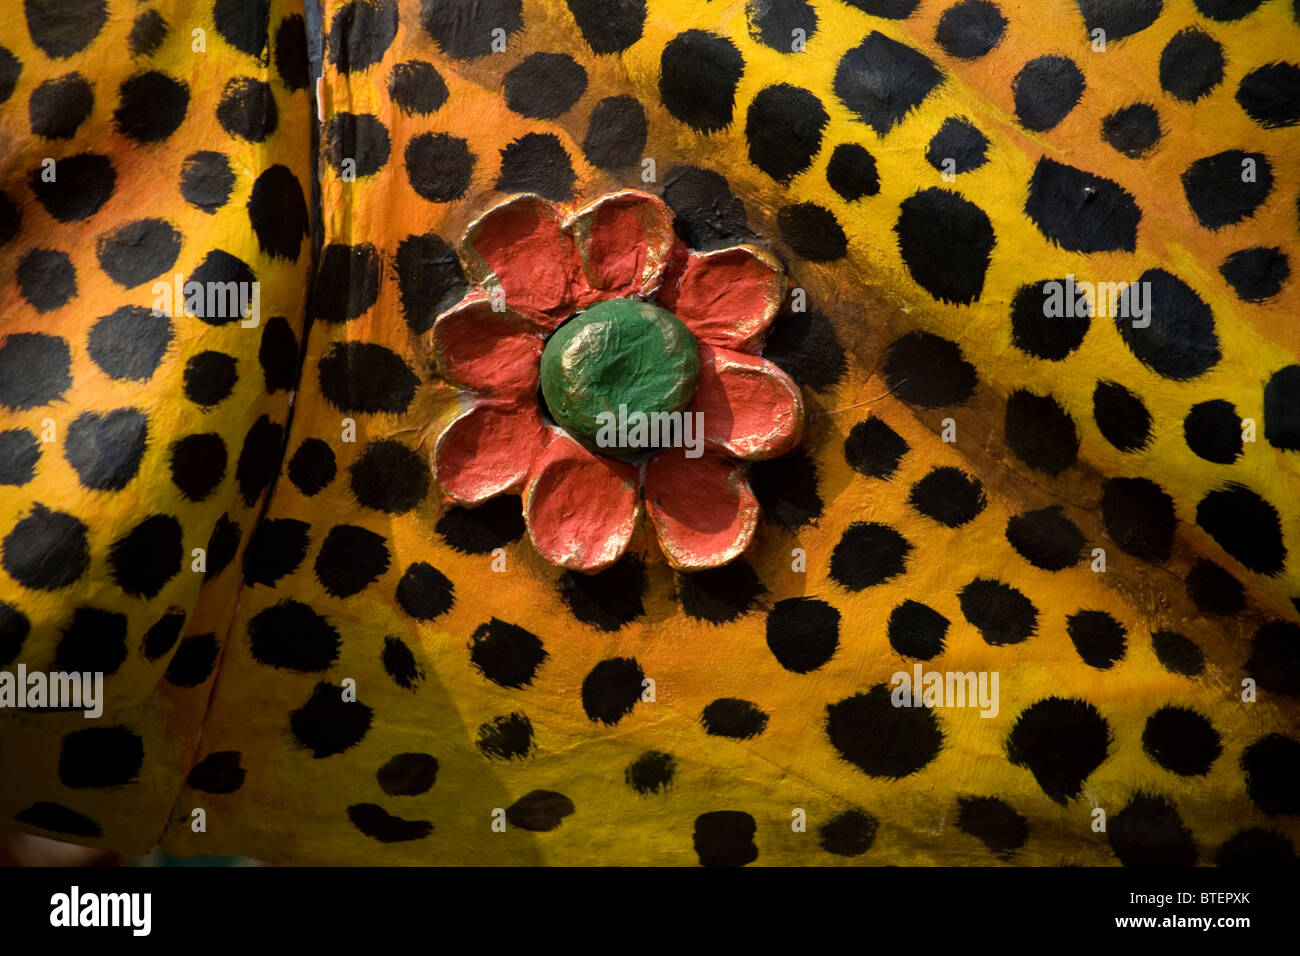 A red flower decorates a alebrije representing the mottled skin of a jaguar in Mexico City, October 27, 2010. Stock Photo